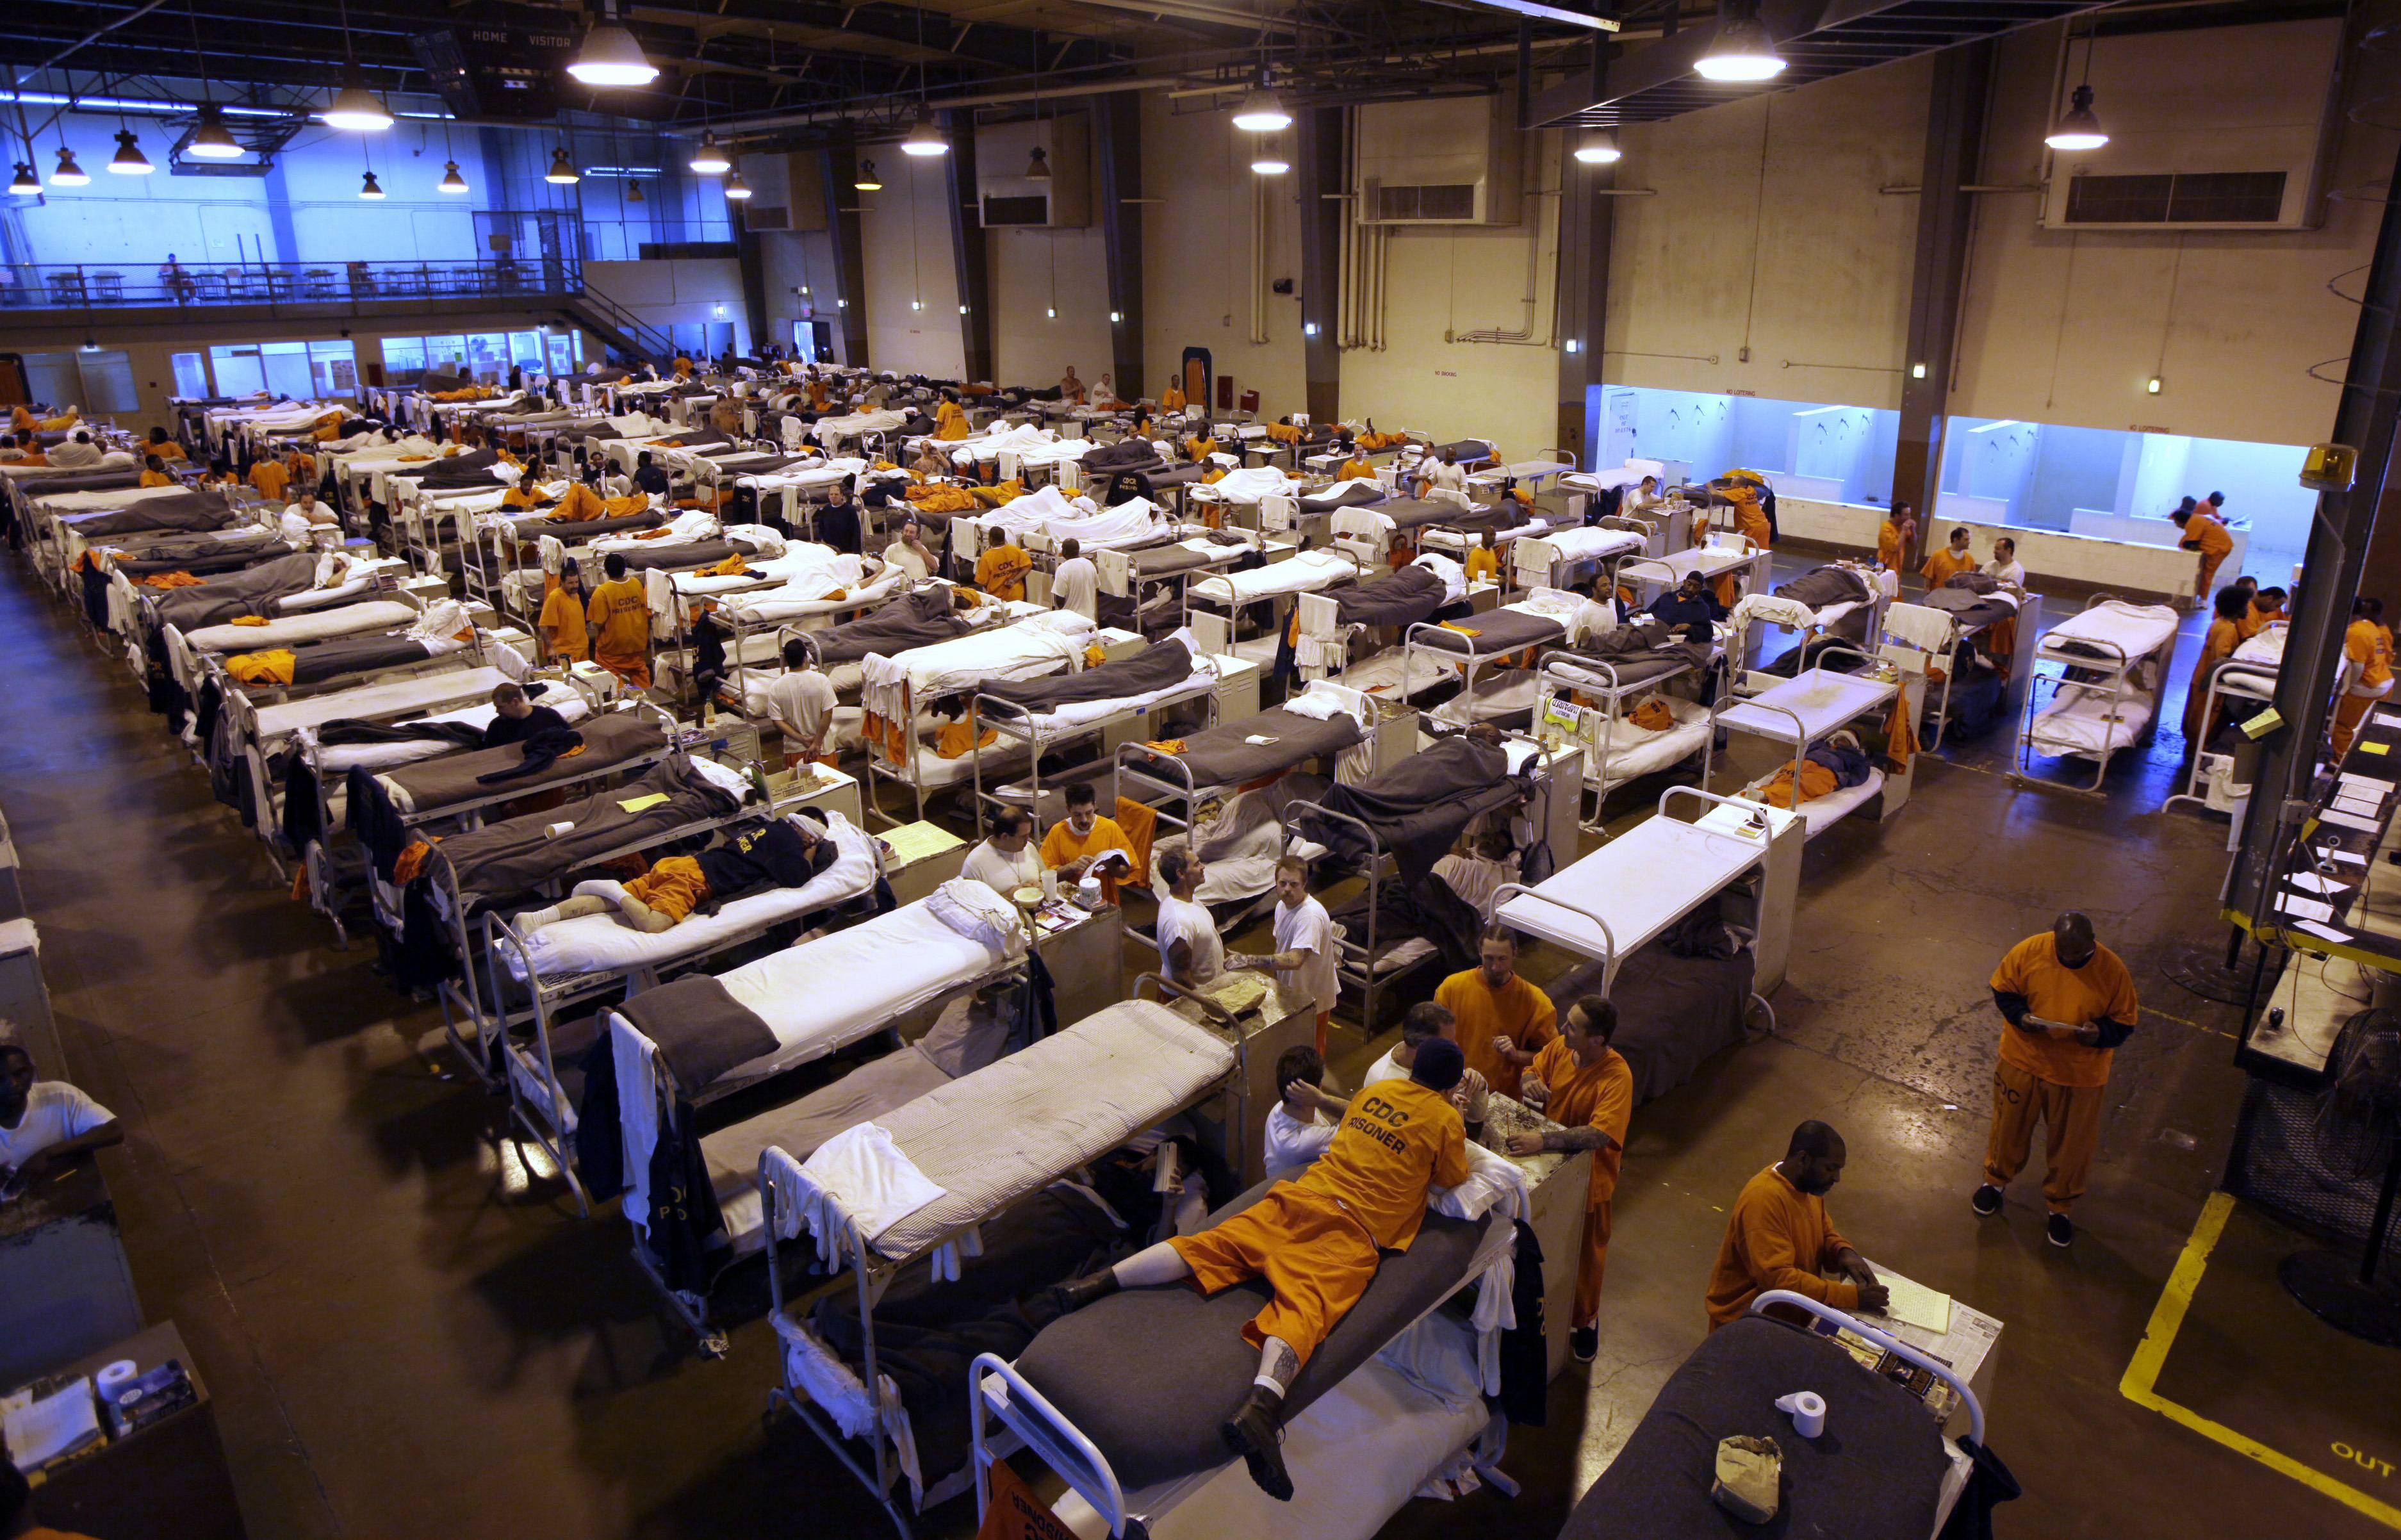 factors that cause overcrowding in prisons